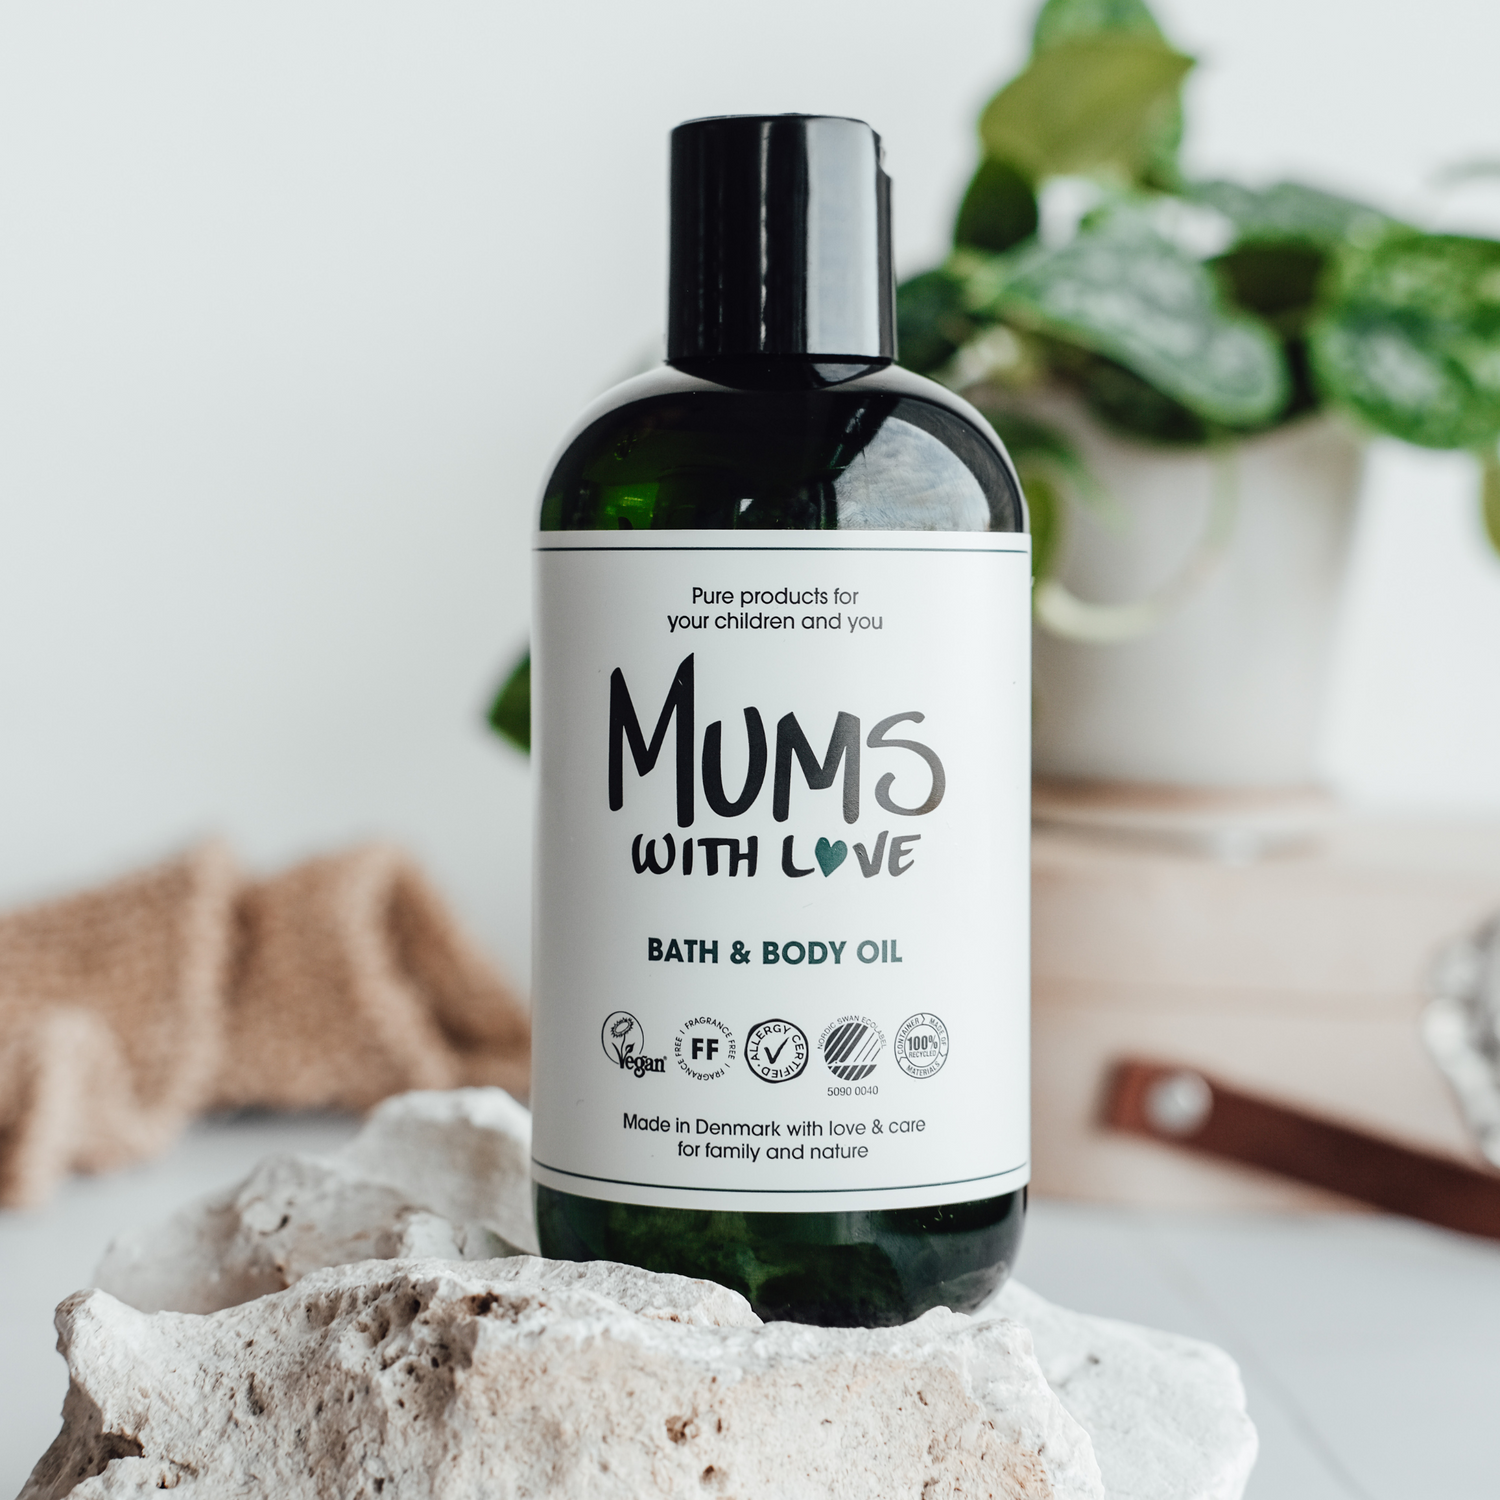 Product picture of MUMS WITH LOVE's Bath & Body Oil on a rock